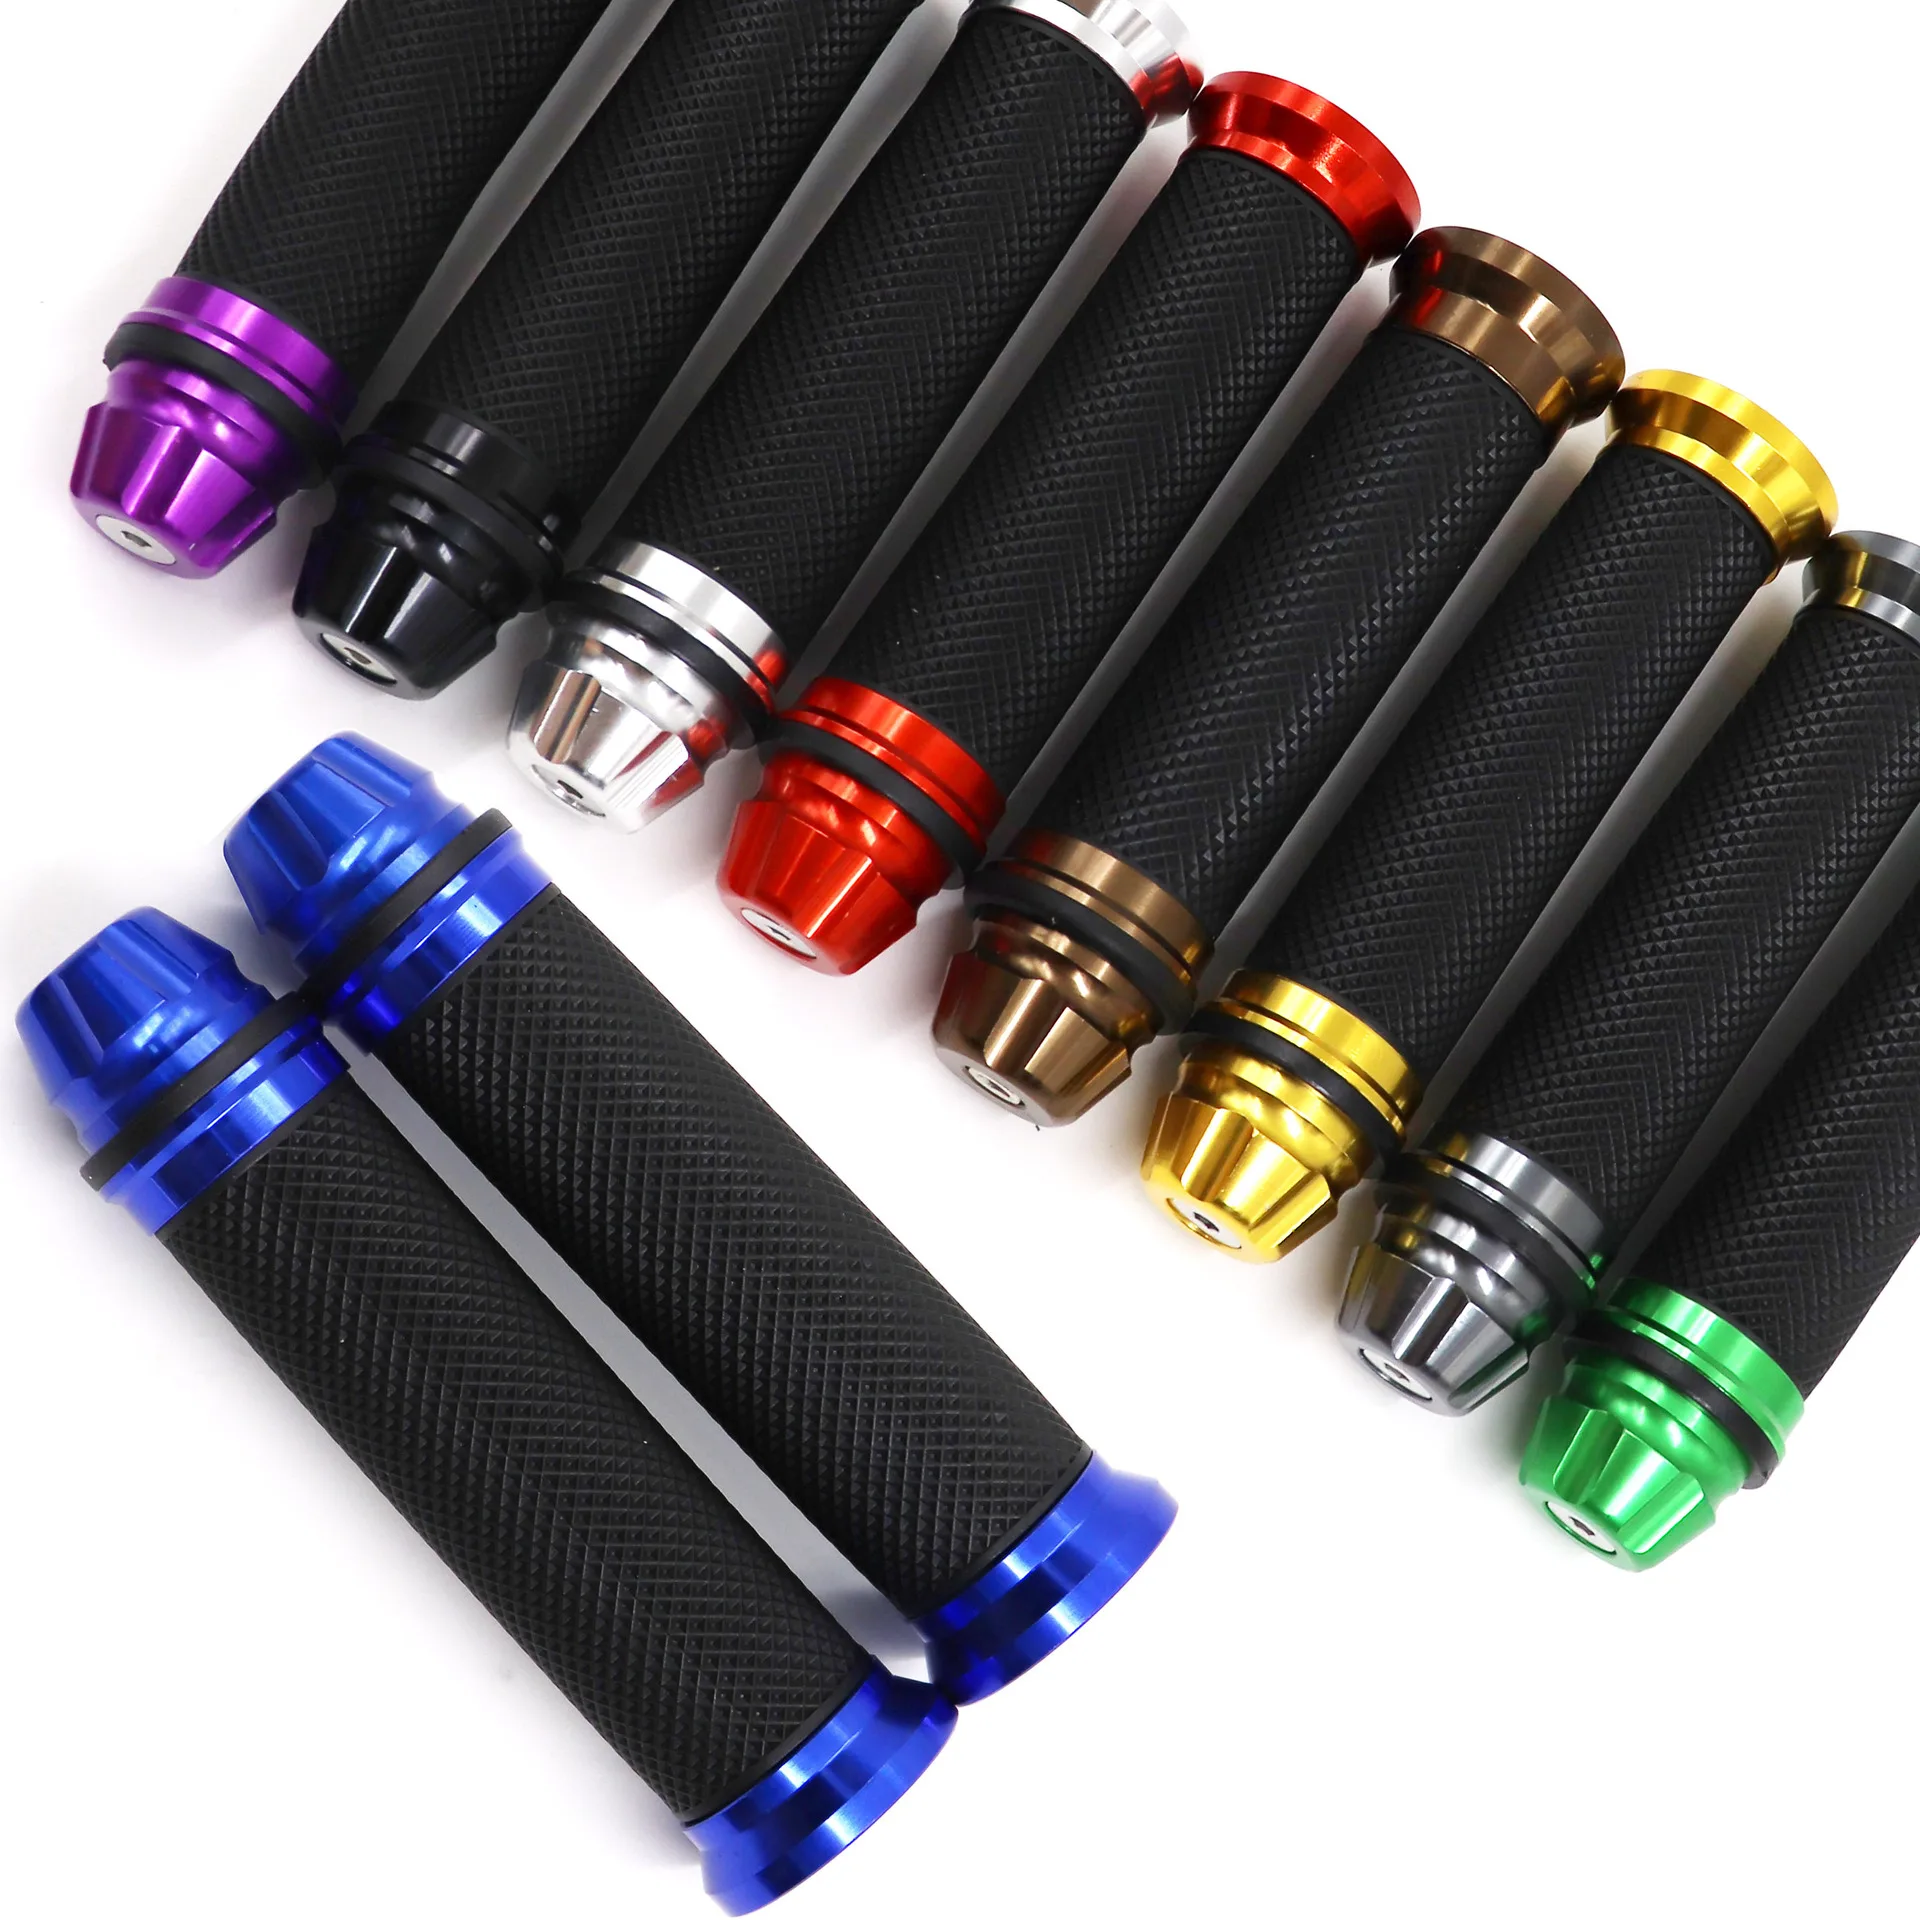 

Motorcycle Handle Grips Non-Slip Bicycle Handlebar Grips Cover For Mountain Bike Scooters Road Bike BMX MTB Cycling